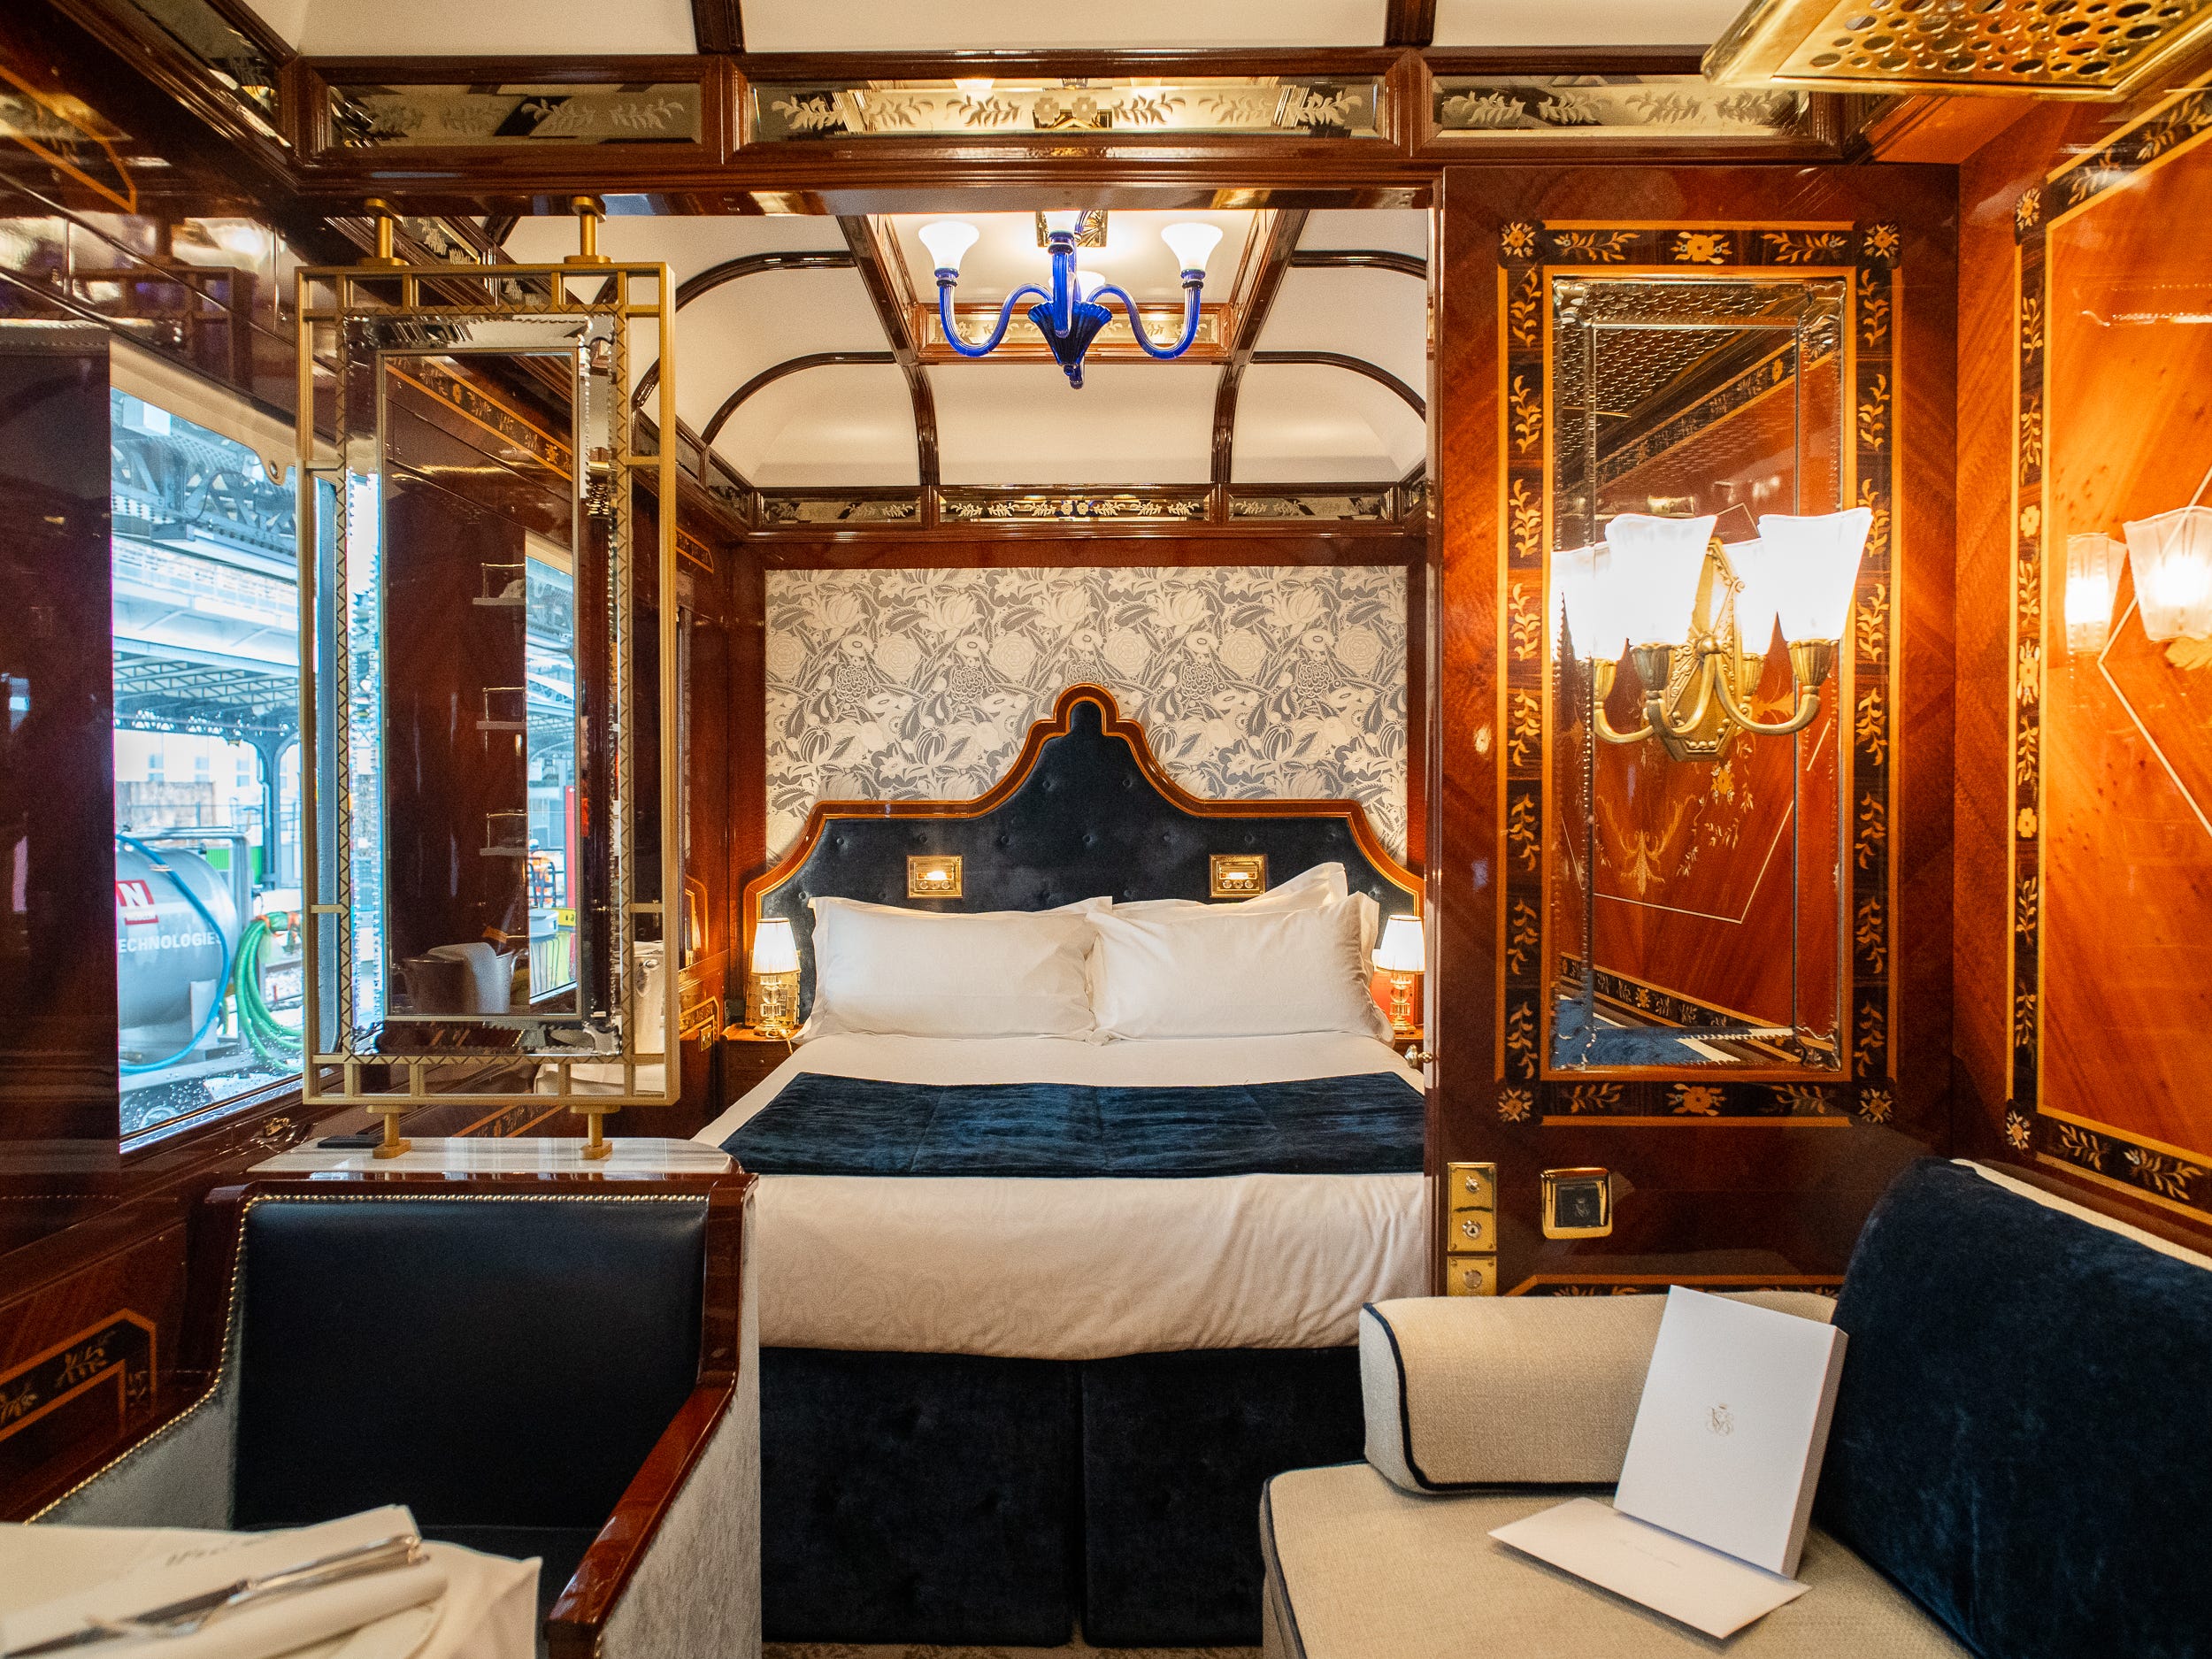 Inside a wood-walled train suite with white and navy blue furnishings, including a seat on the left, a couch on the right, and a bed in the back center.